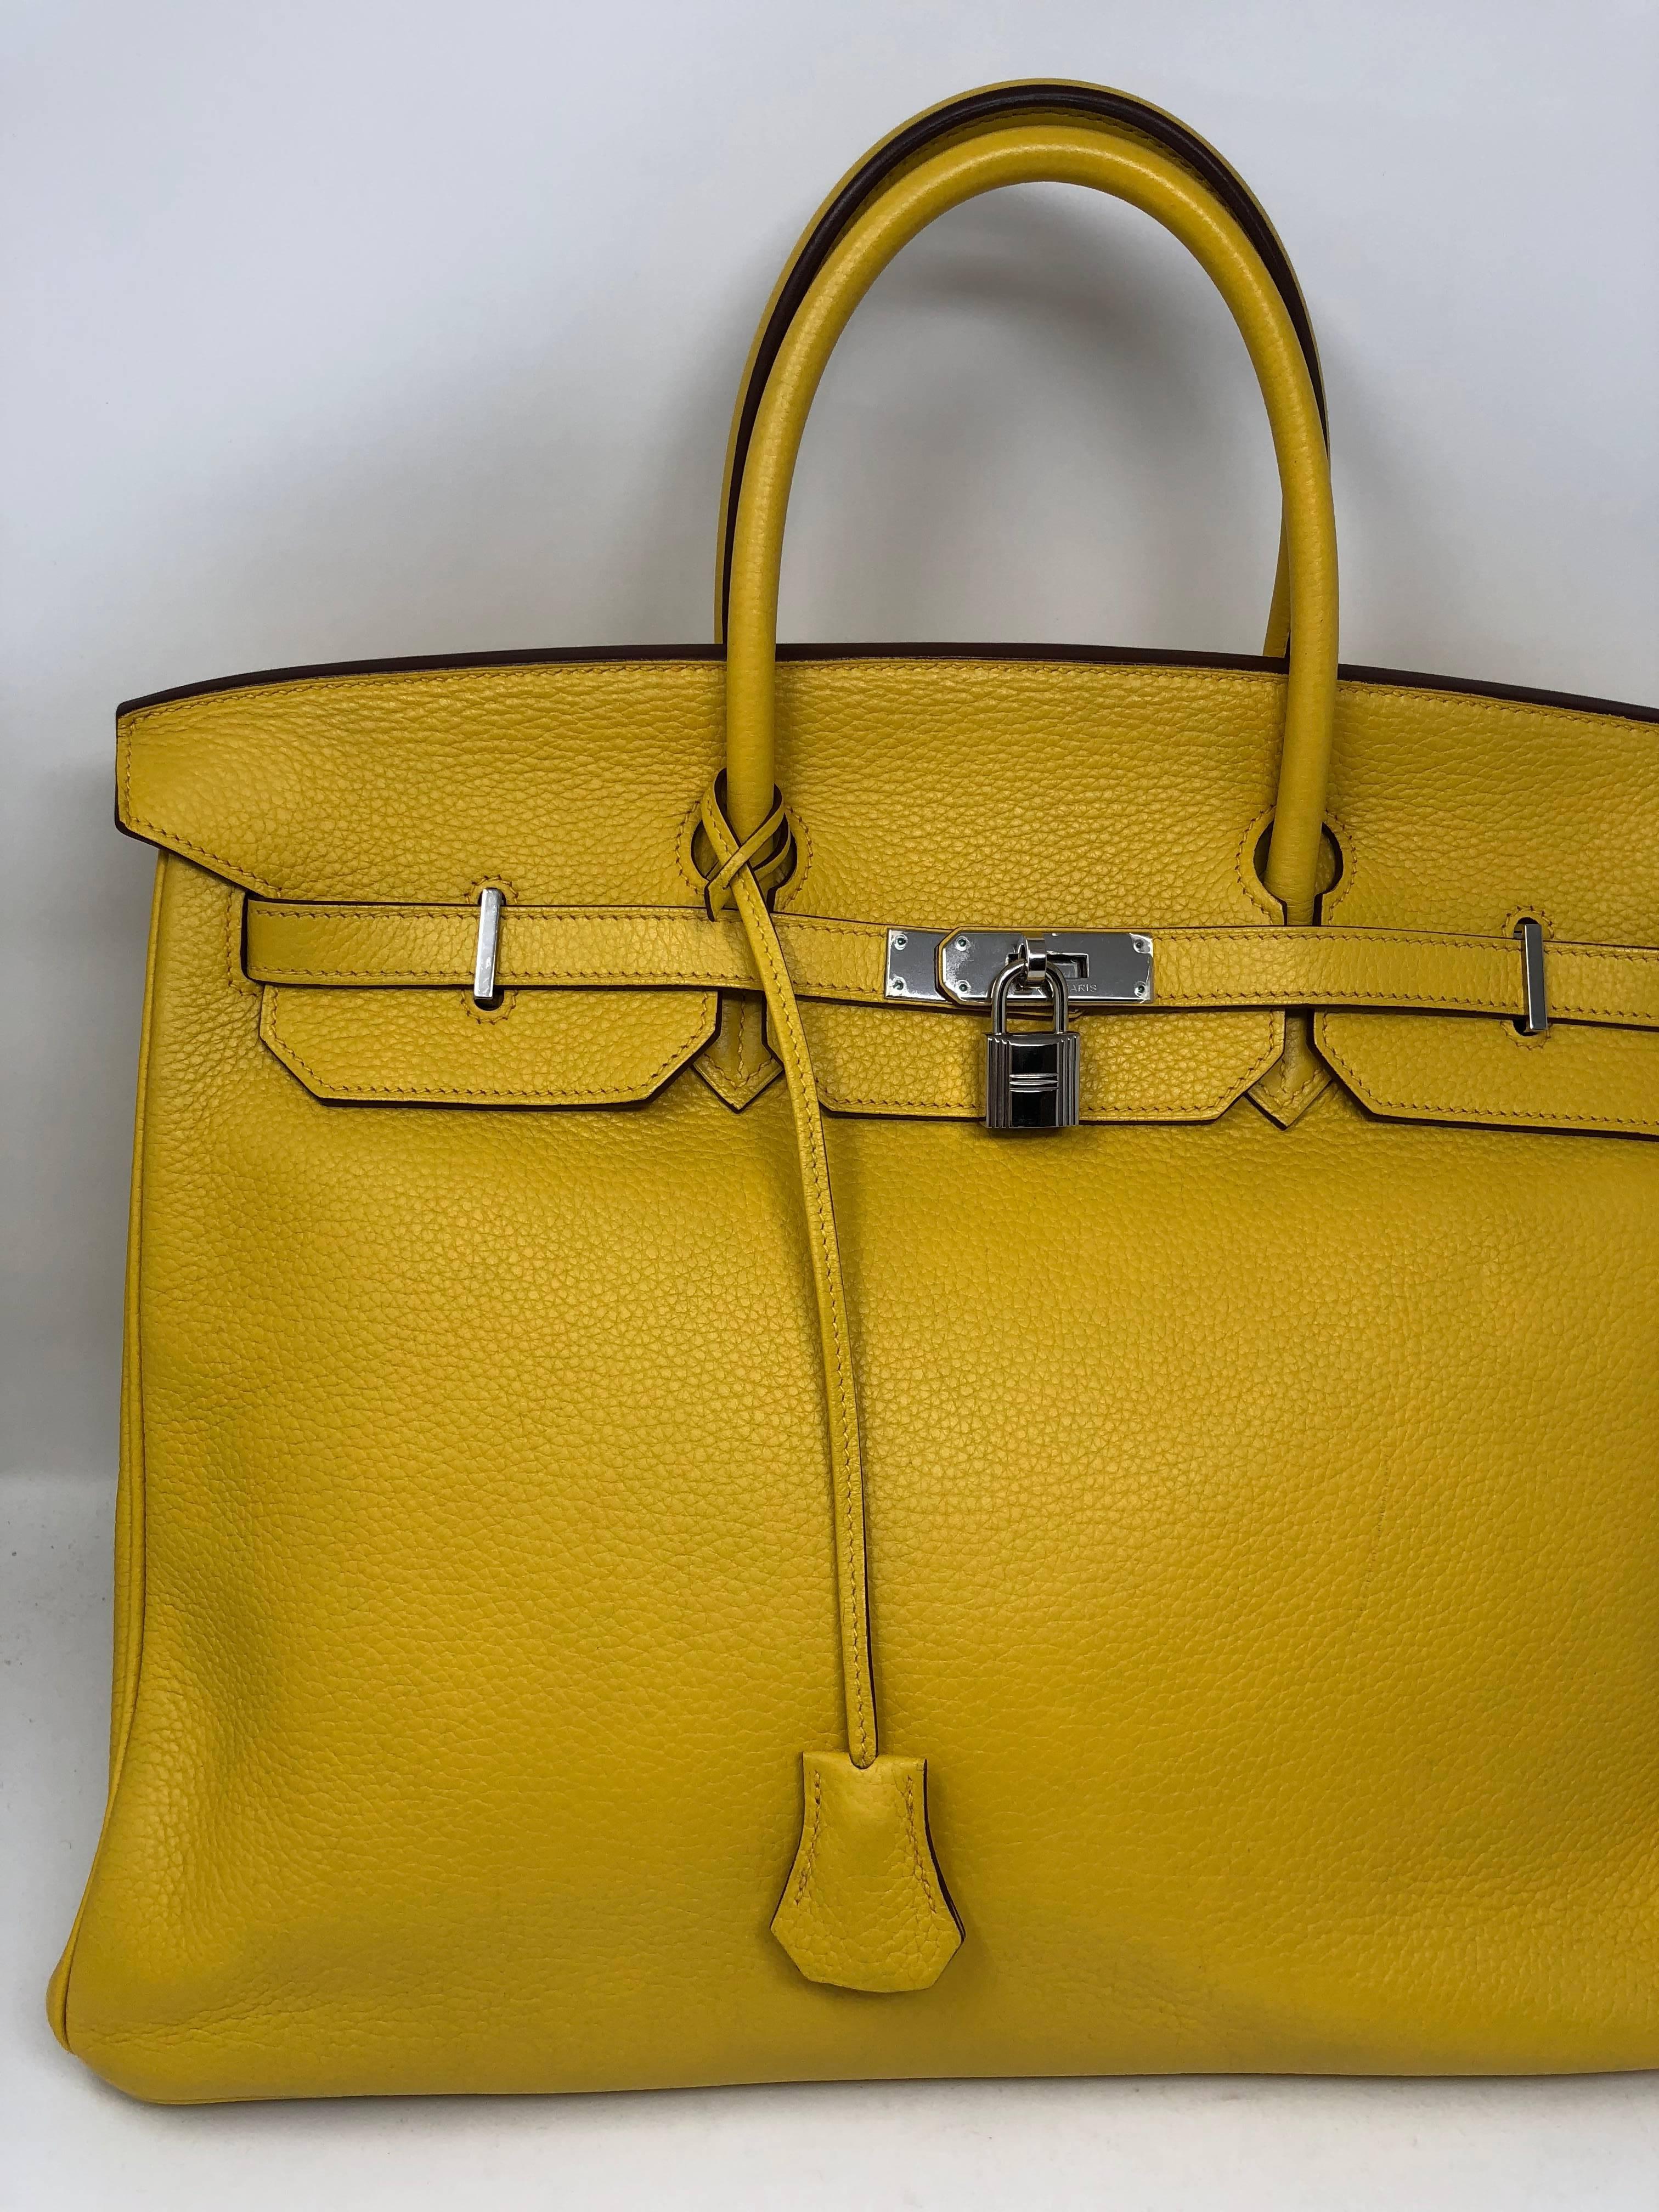 Hermes Yellow Soleil Birkin 40 in Veau Taurillon Clemence leather. Palladium hardware from 2009 (M square). Bright yellow color pops with any outfit. Good condition. Comes with clochette, keys and dust cover. Guaranteed authentic. 